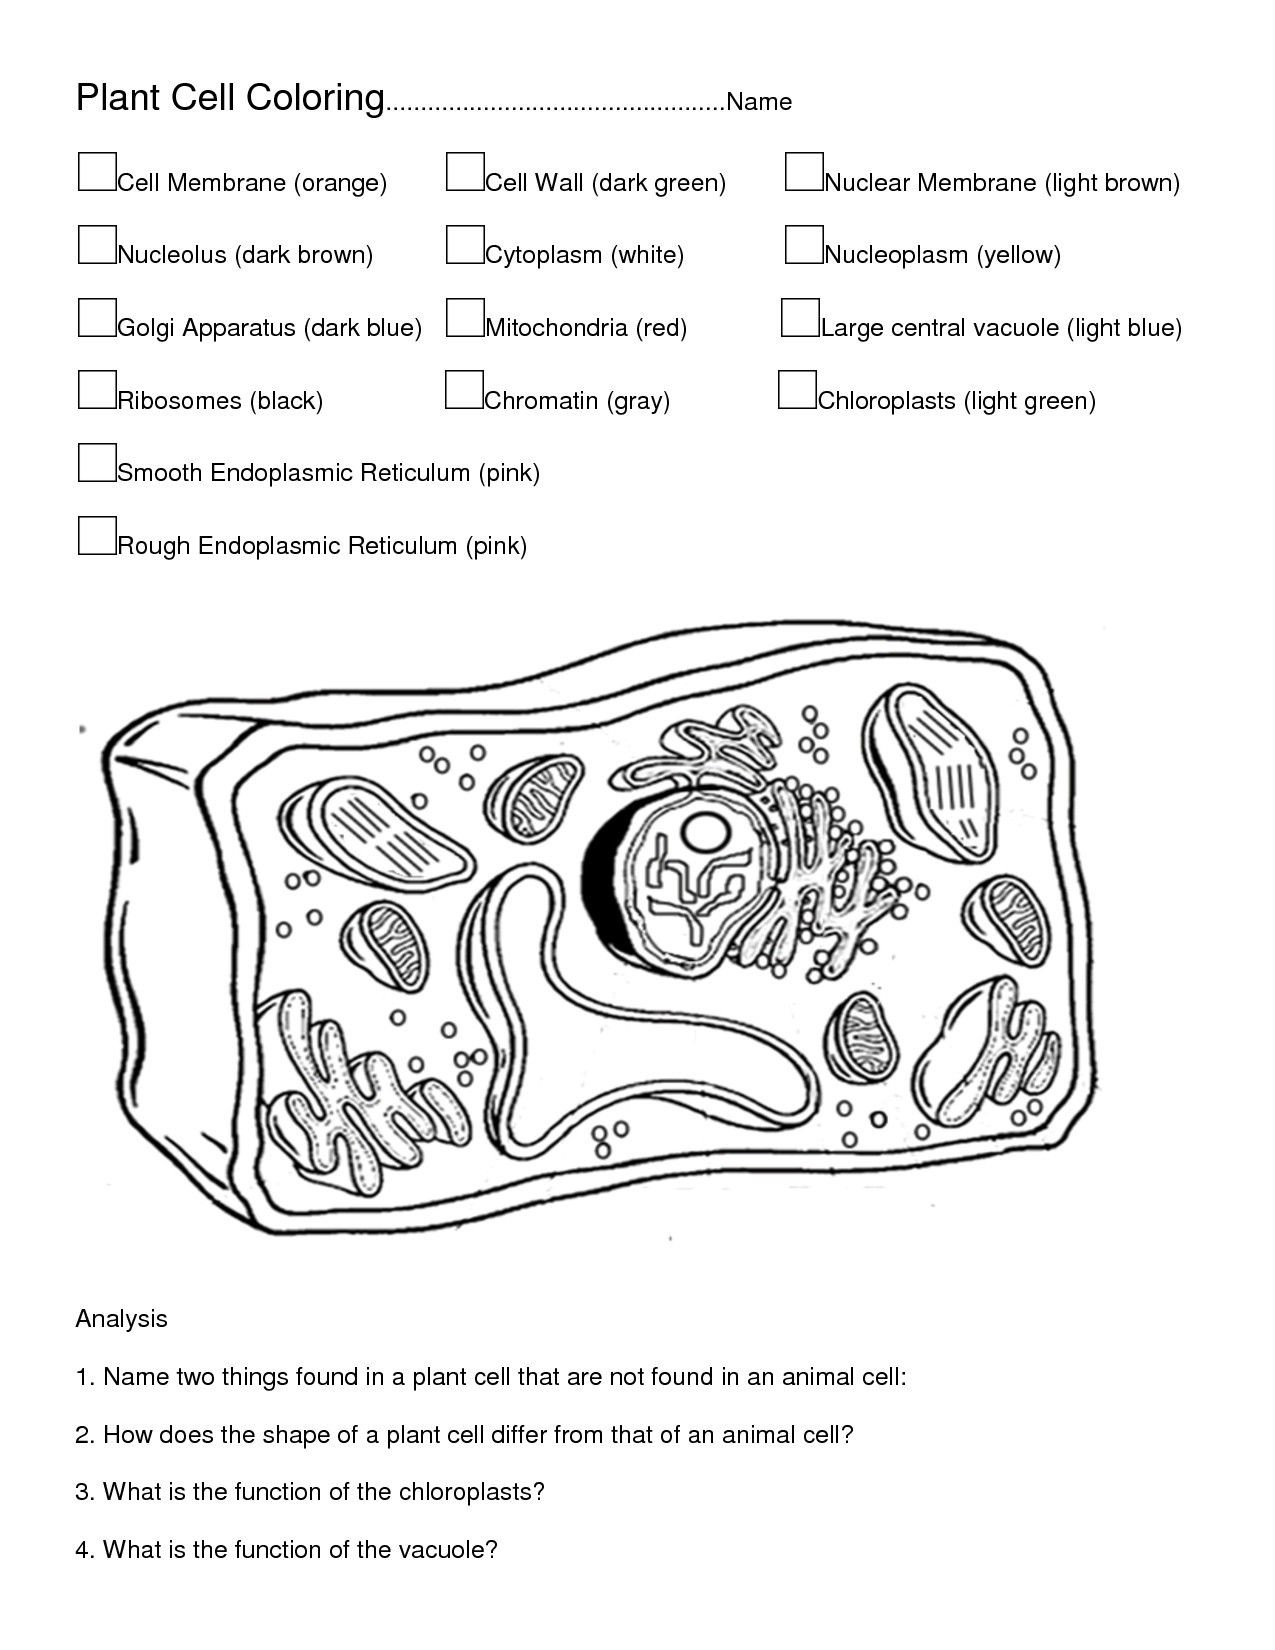 Animal and Plant Cells Worksheet Plant and Animal Cells to Color – Through the